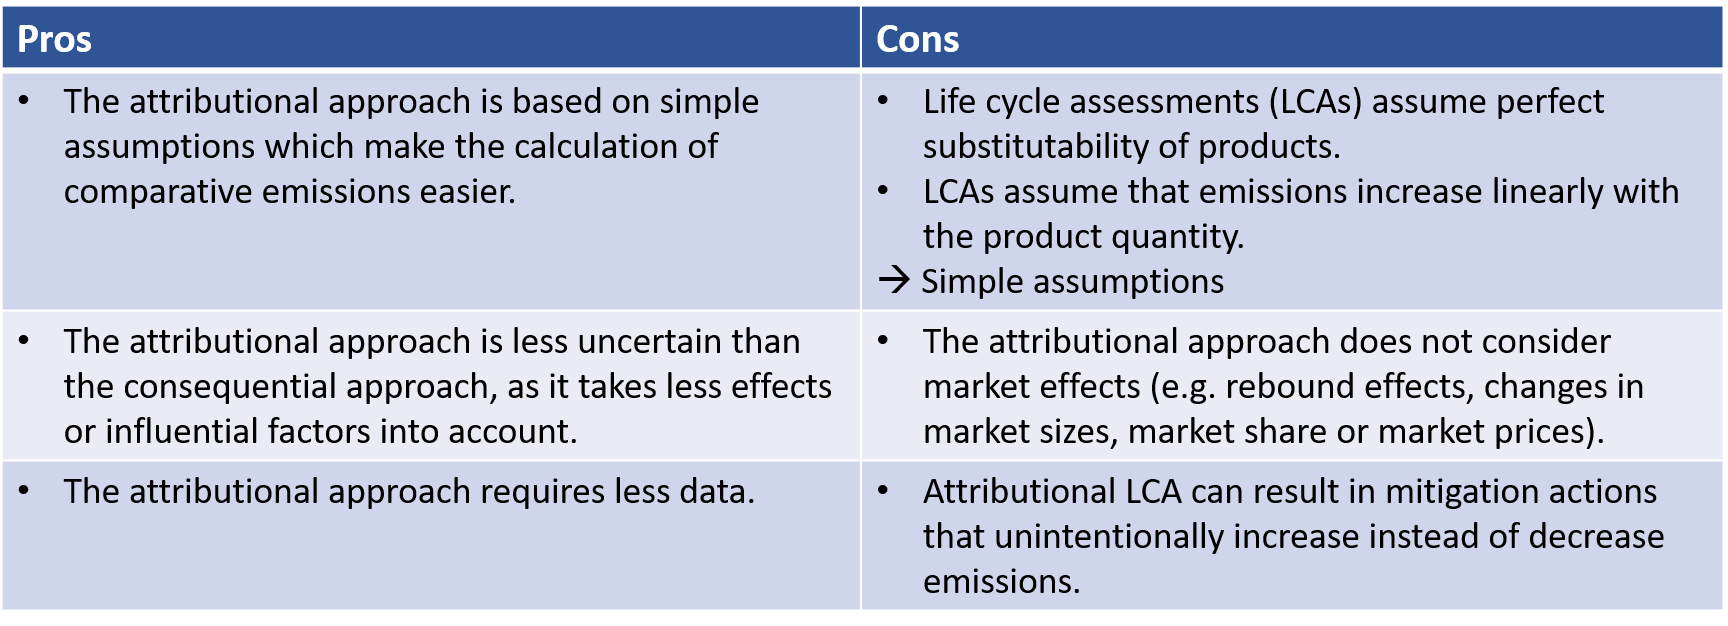 Attributional Approach to disclose avoided emissions